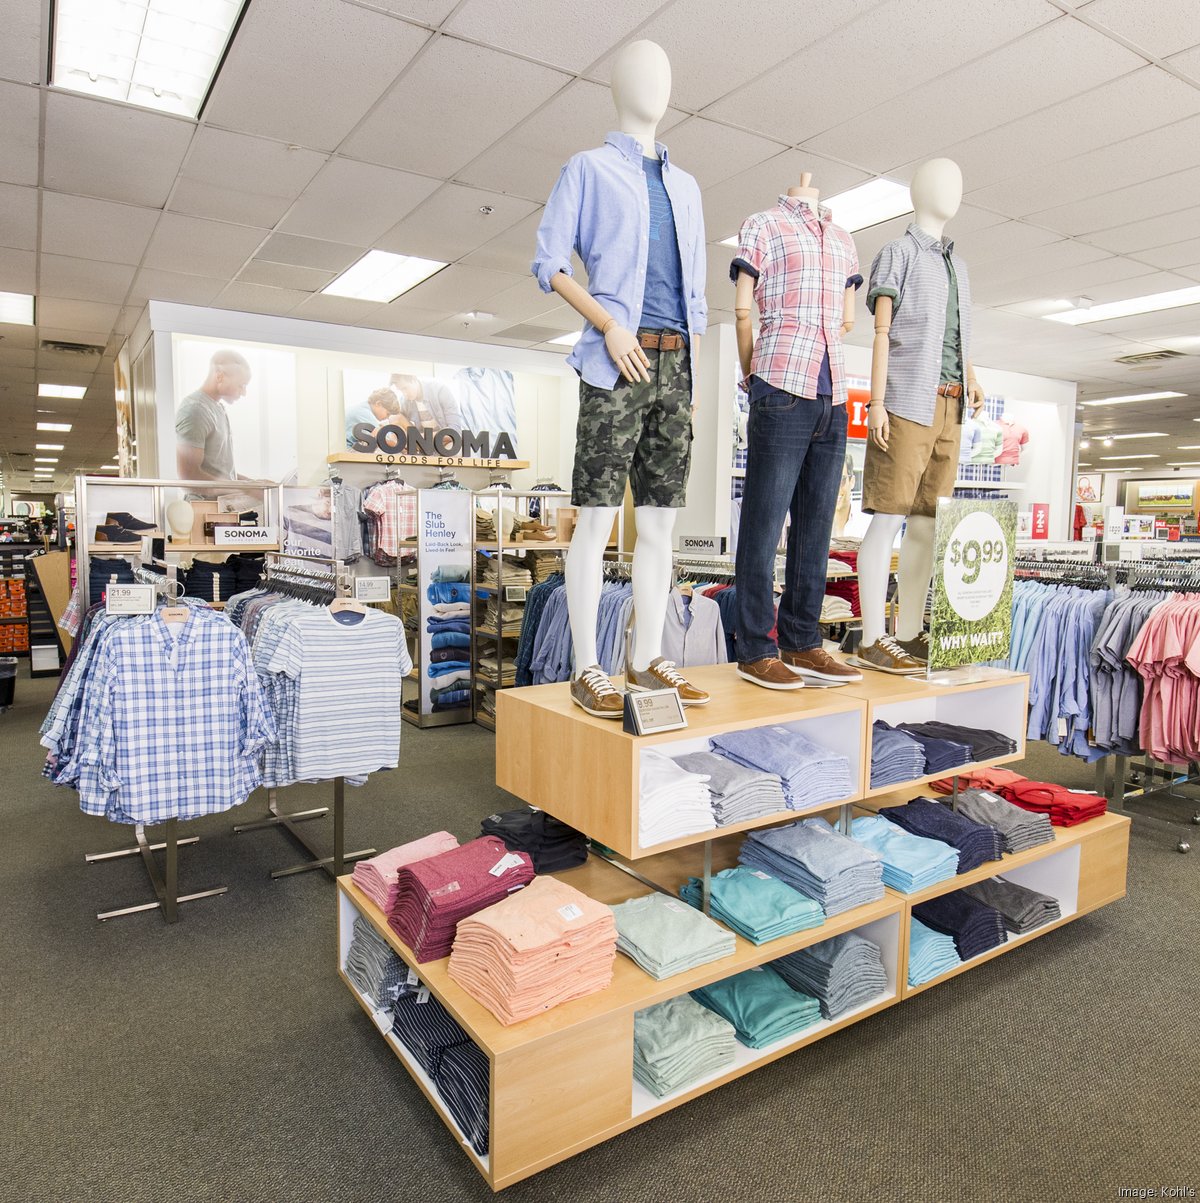 Kohl's holiday look offers glimpse into turnaround plan